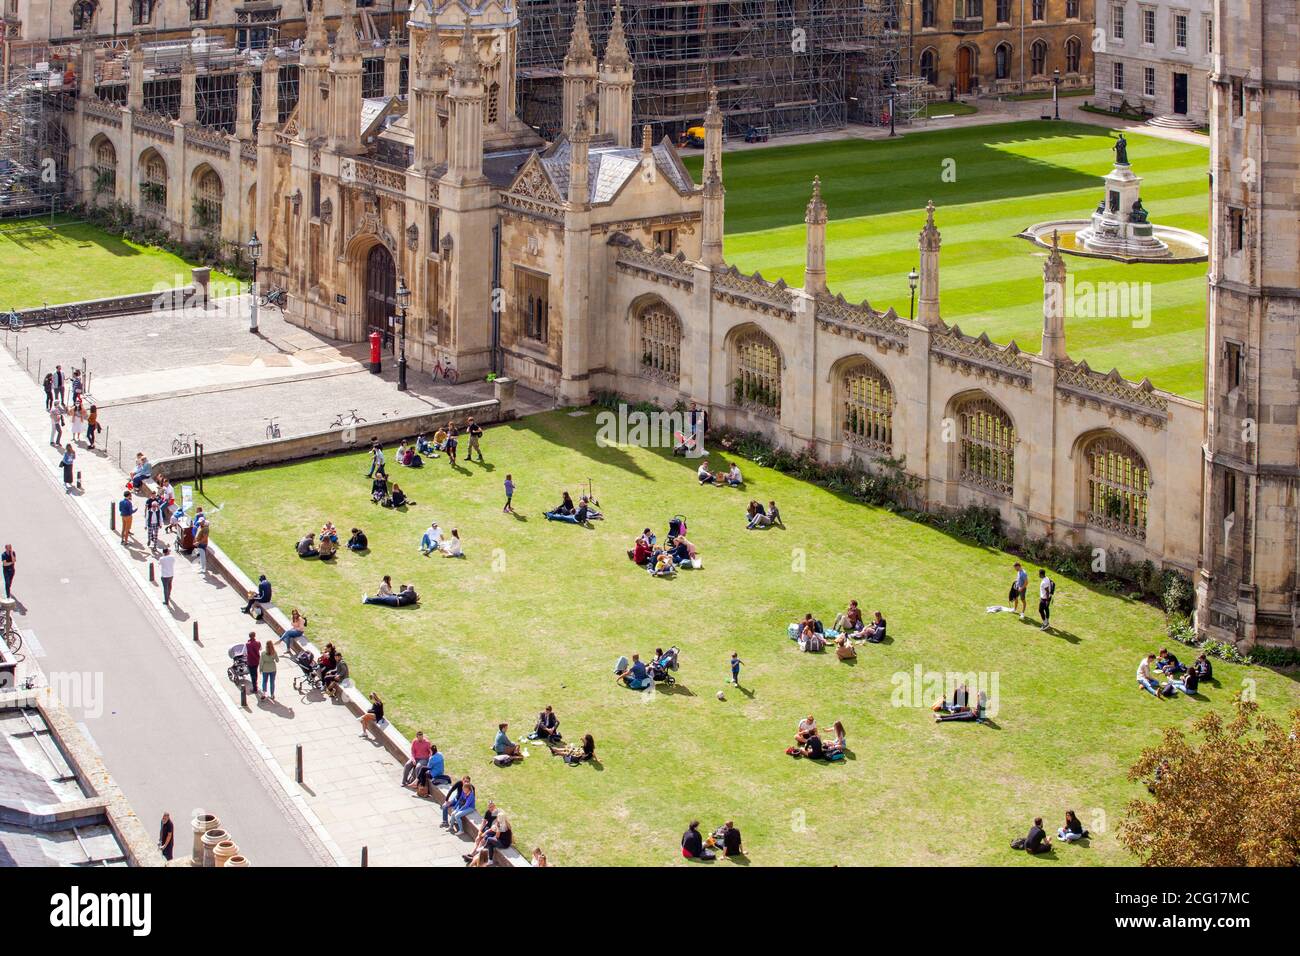 Tourists holidaymakers visitors and day trippers picnicking on the grass lawns in front of Kings collage Cambridge Cambridgeshire viewed from above Stock Photo